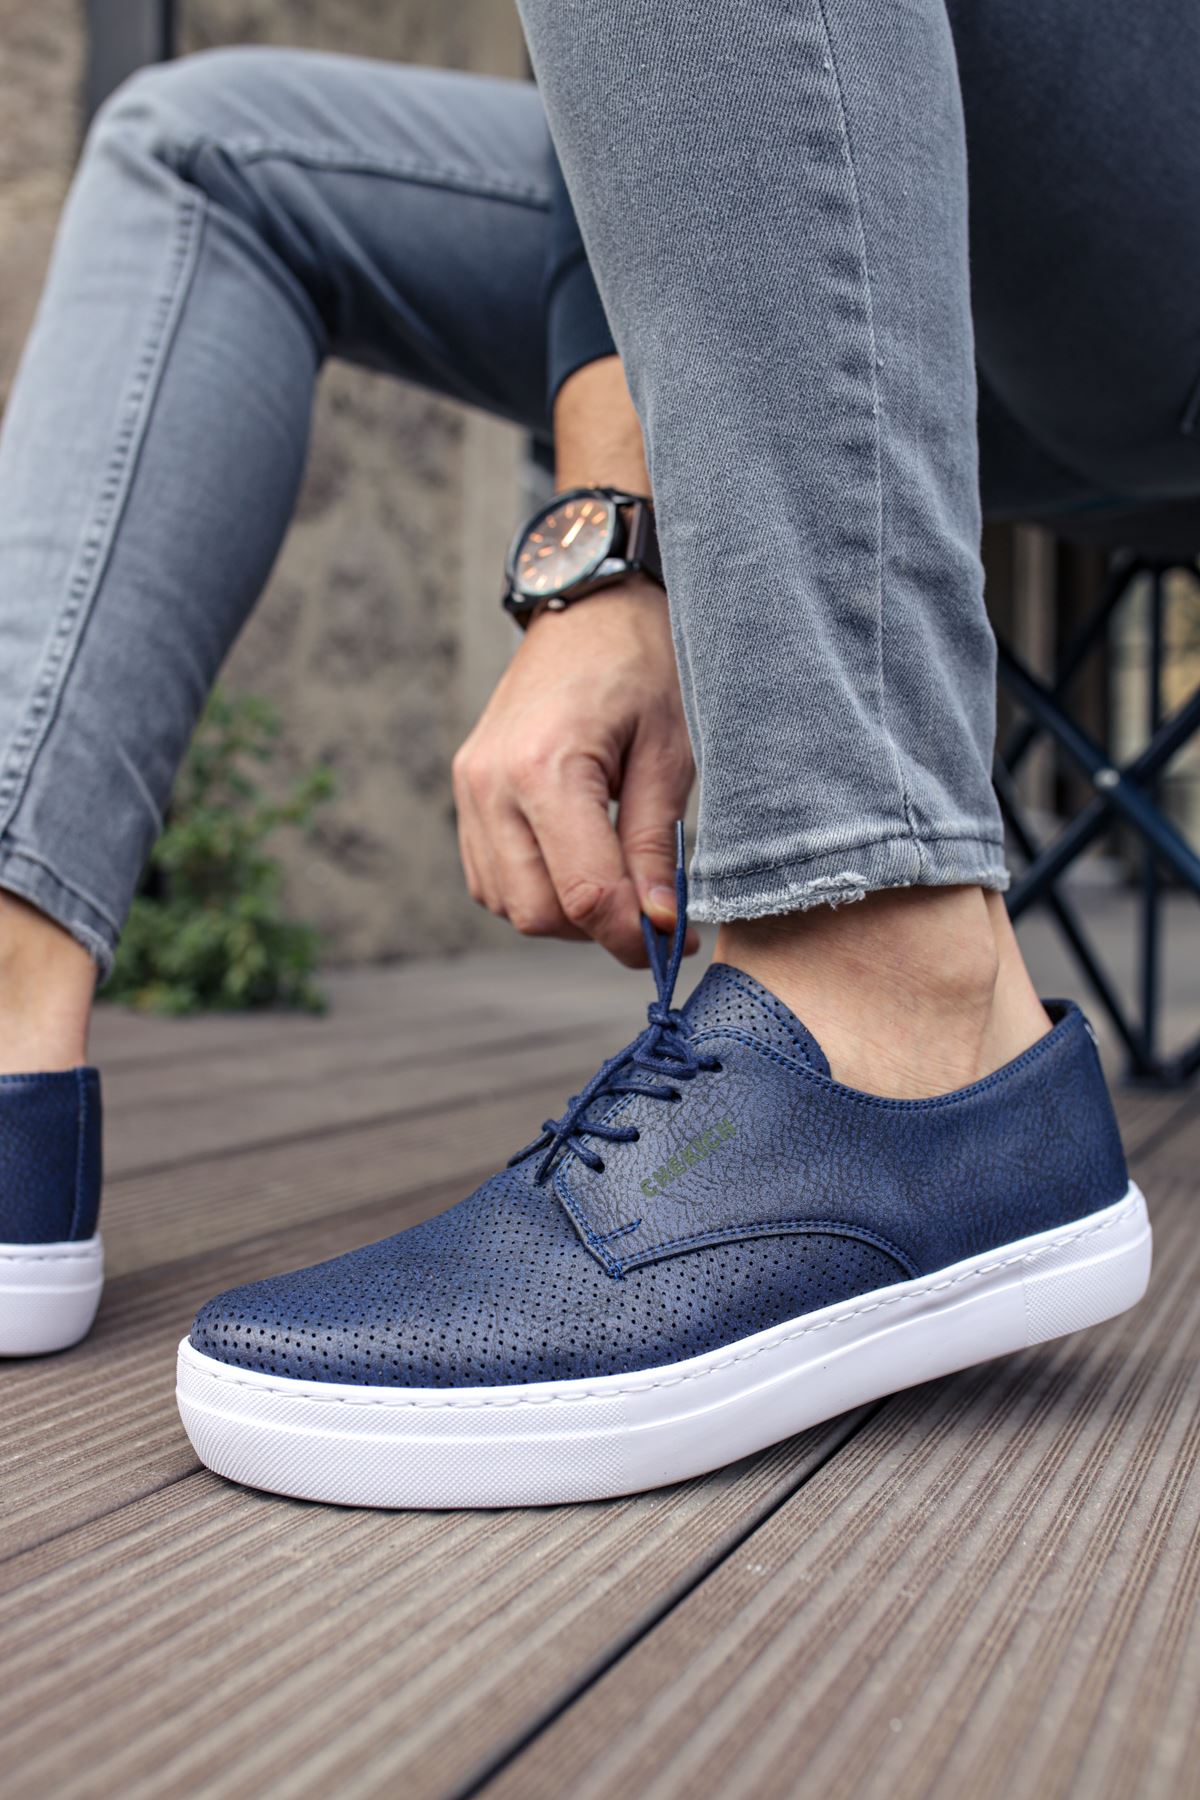 CH061 Men's Orthopedics Navy Blue-White Sole Lace-up Casual Sneaker Shoes - STREETMODE™